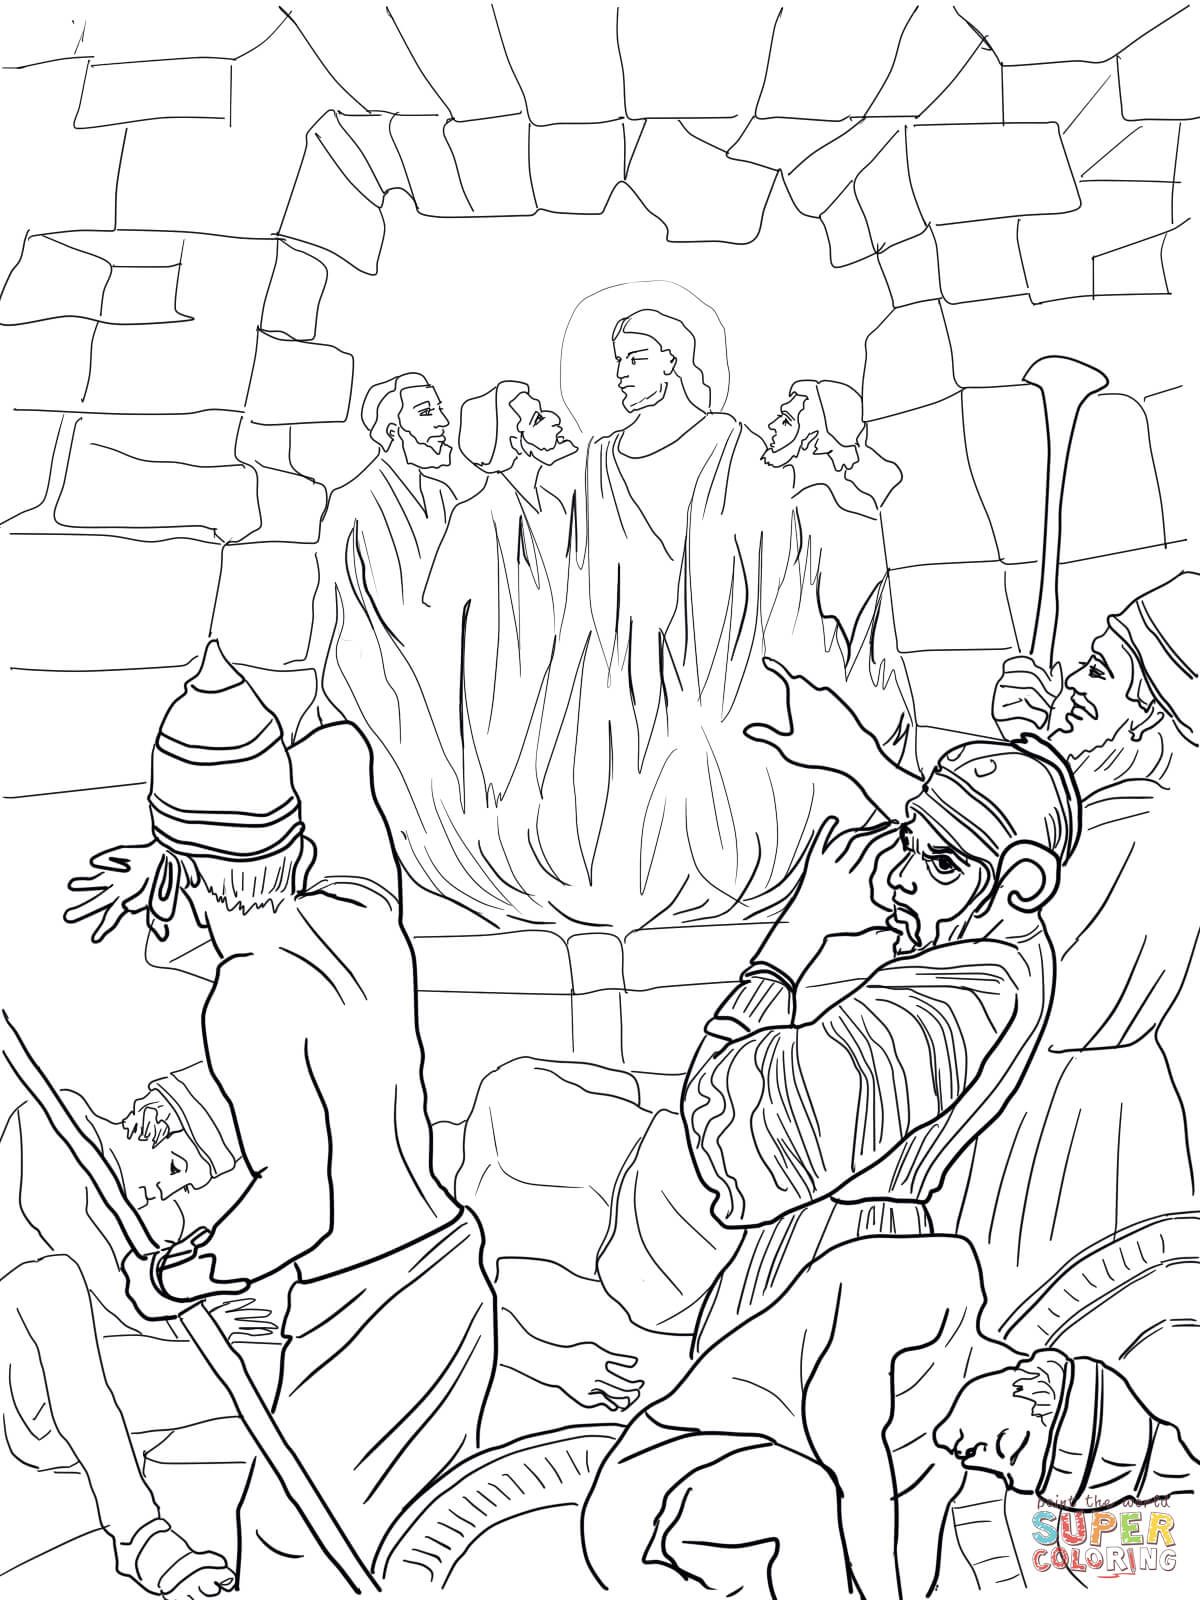 Shadrach meshach and abednego in the fiery furnace coloring page free printable coloring pages